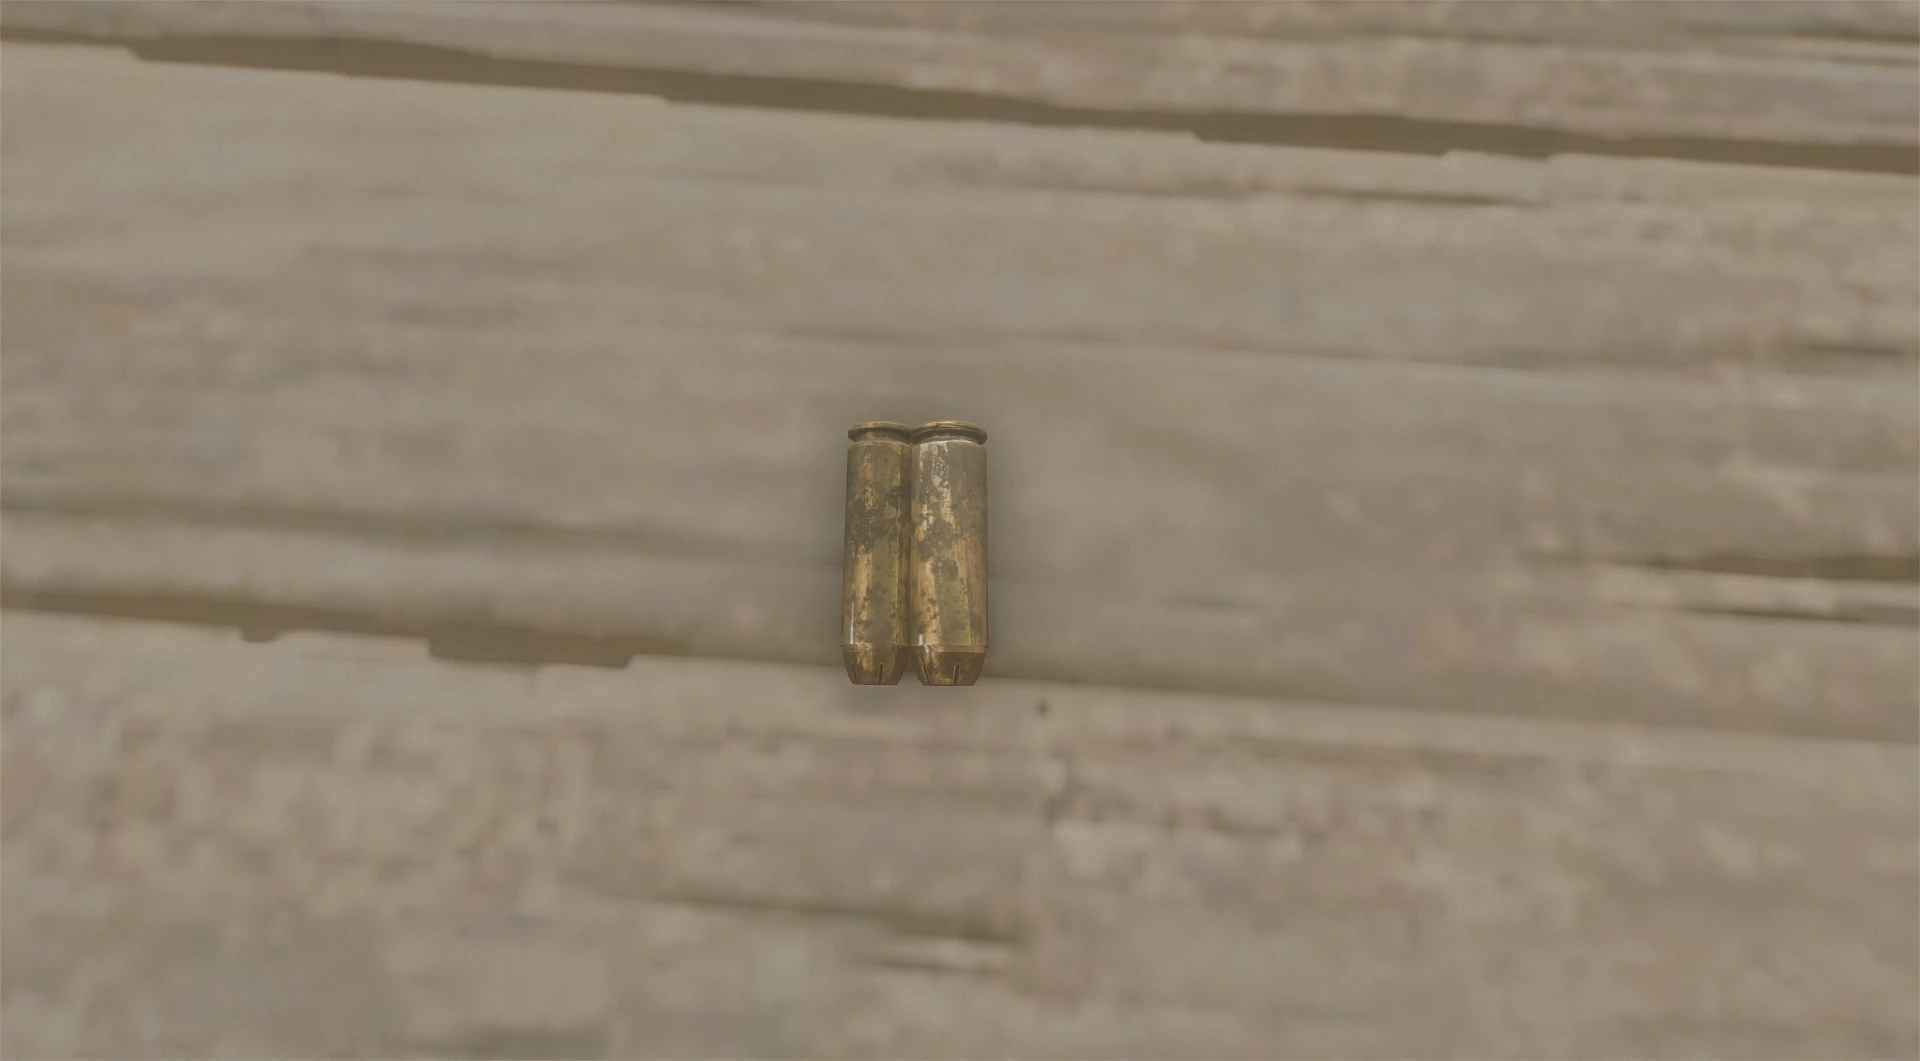 fallout 4 50 cal ammo where to find